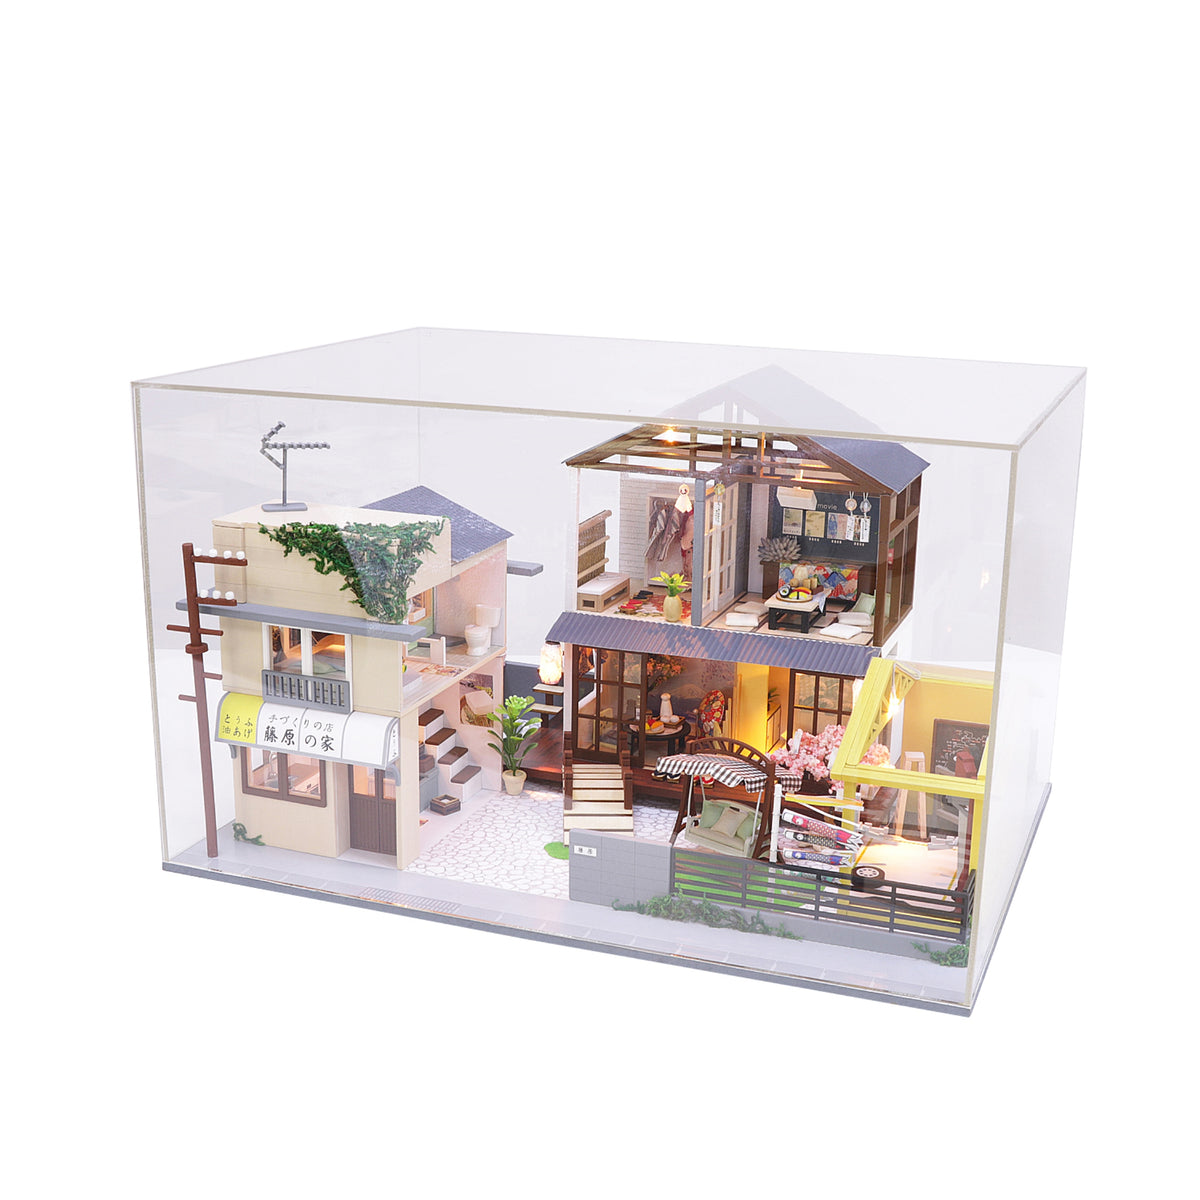 1:24 Miniature DIY Dollhouse Kit - Wooden Japanese Home with a Garage ...